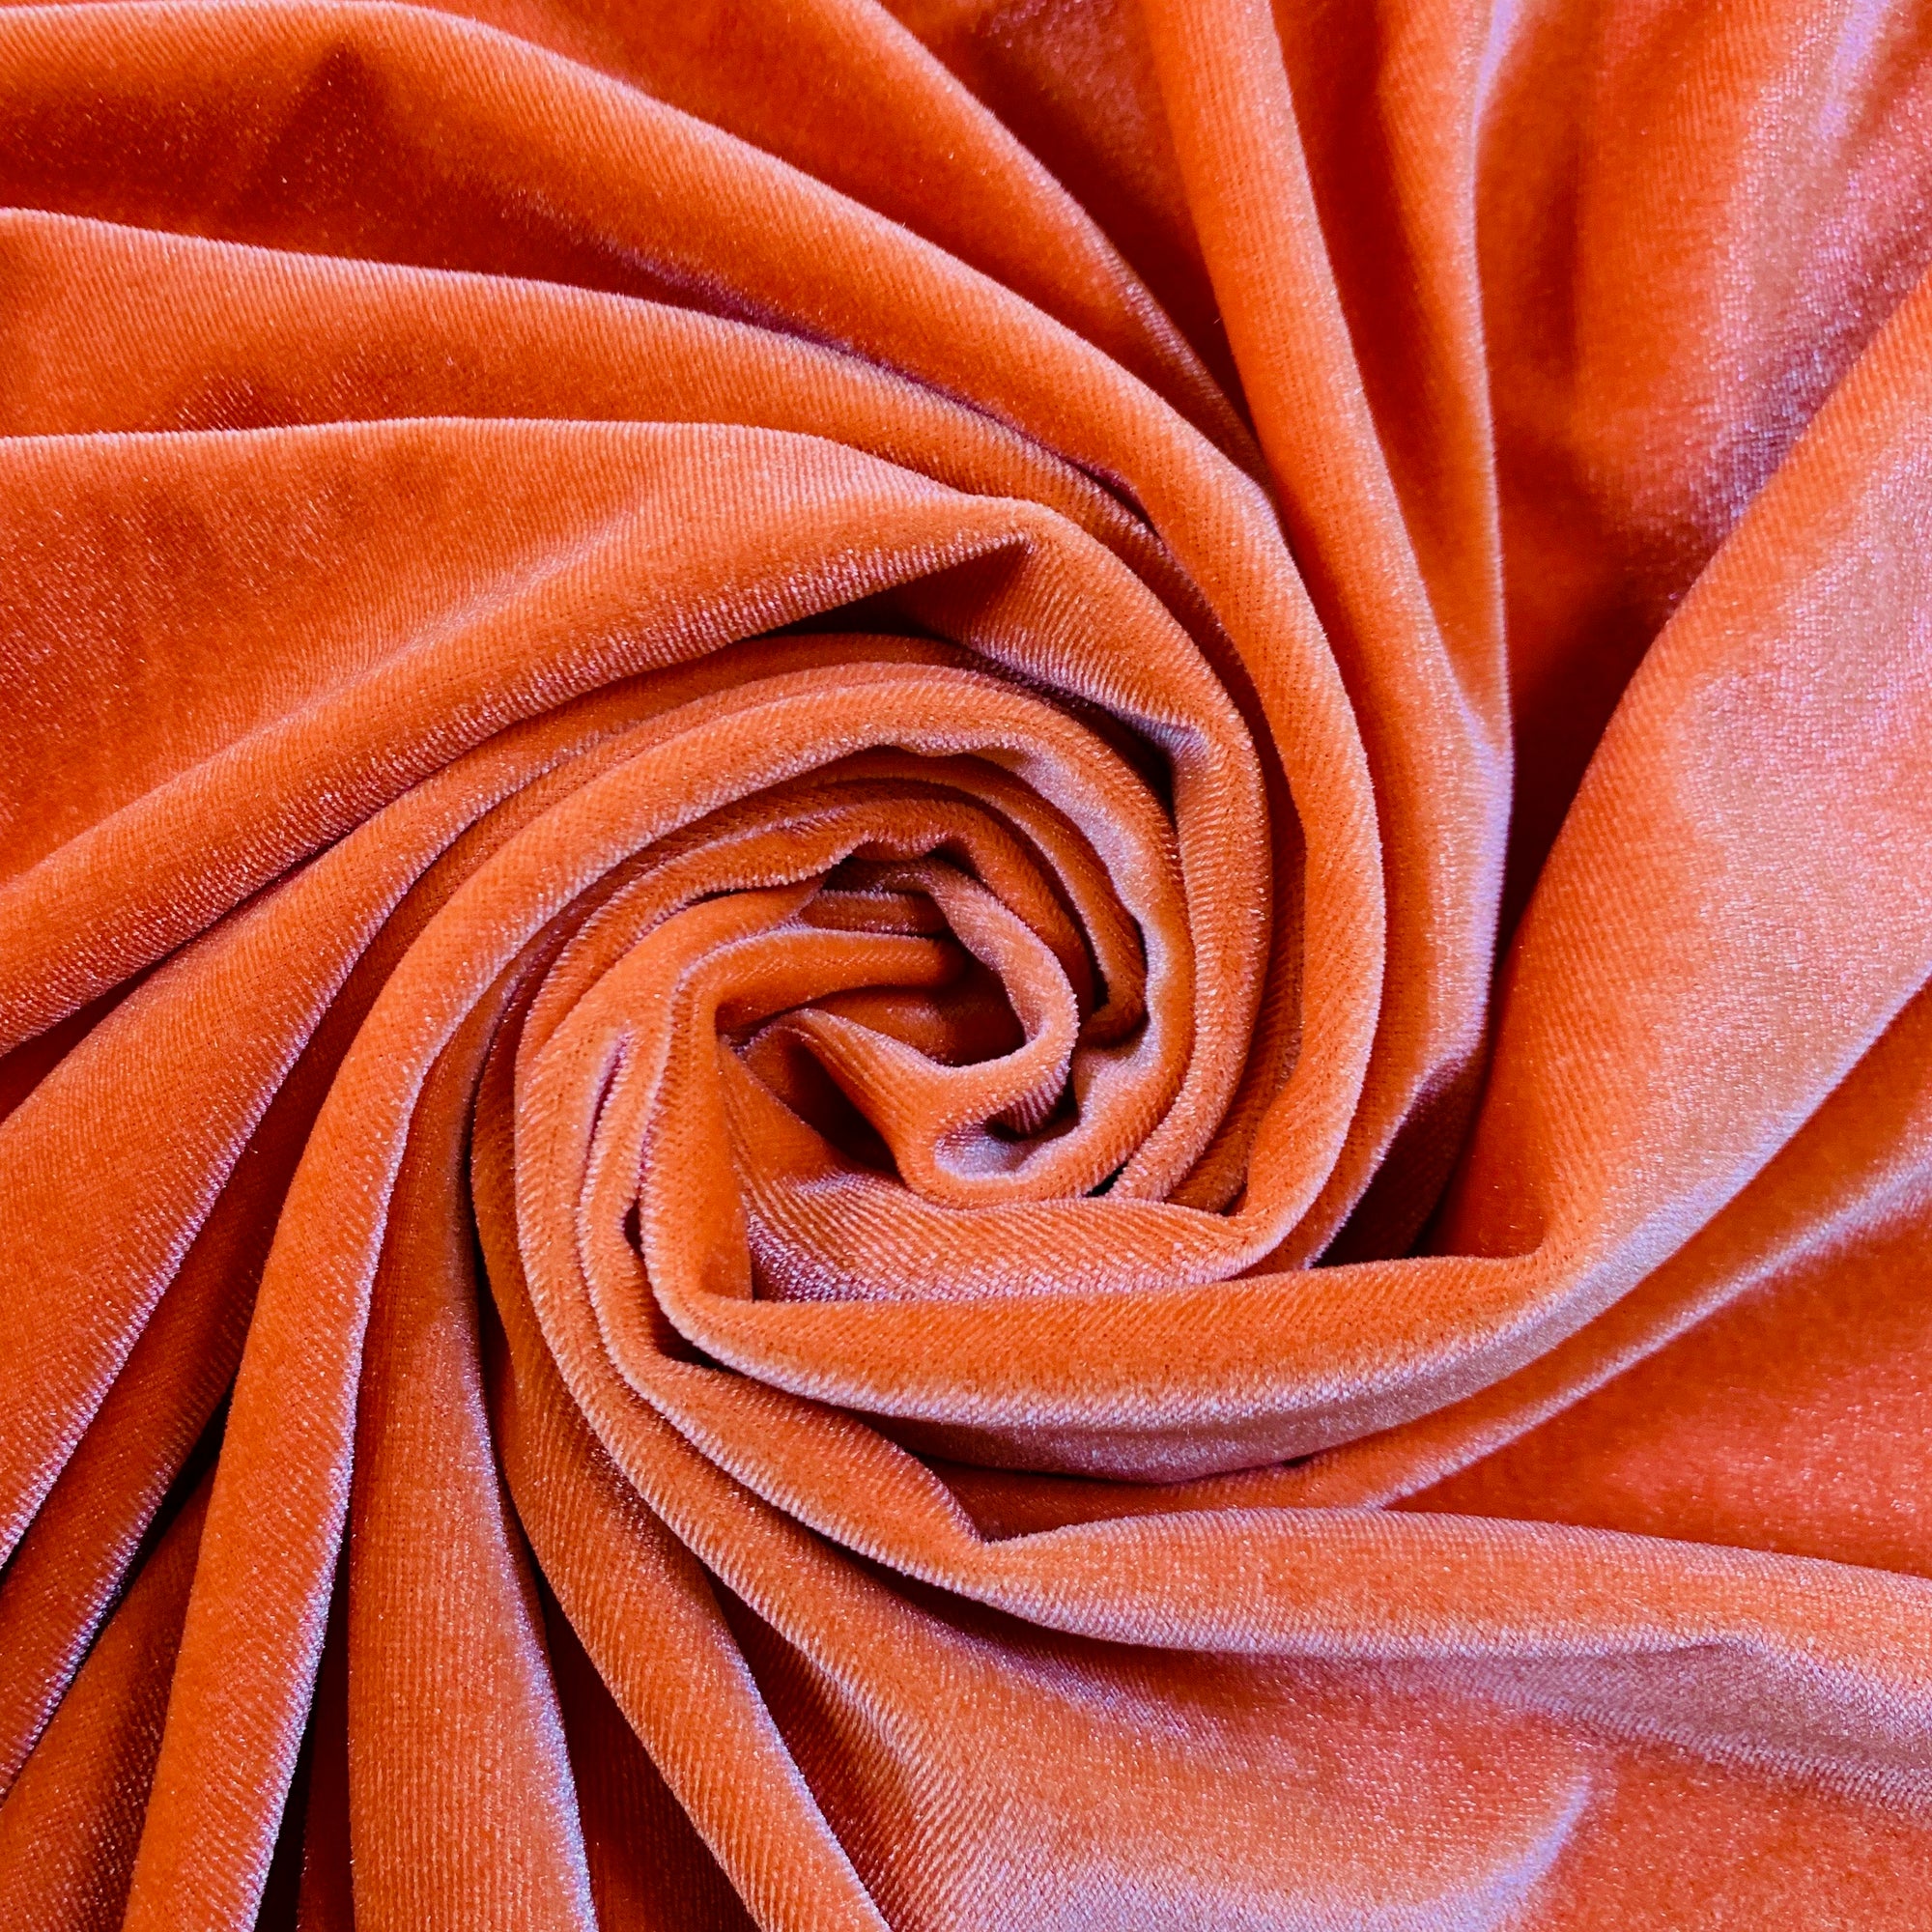 Princess ORANGE Polyester Stretch Velvet Fabric for Bows, Top Knots, Head Wraps, Scrunchies, Clothes, Costumes, Crafts